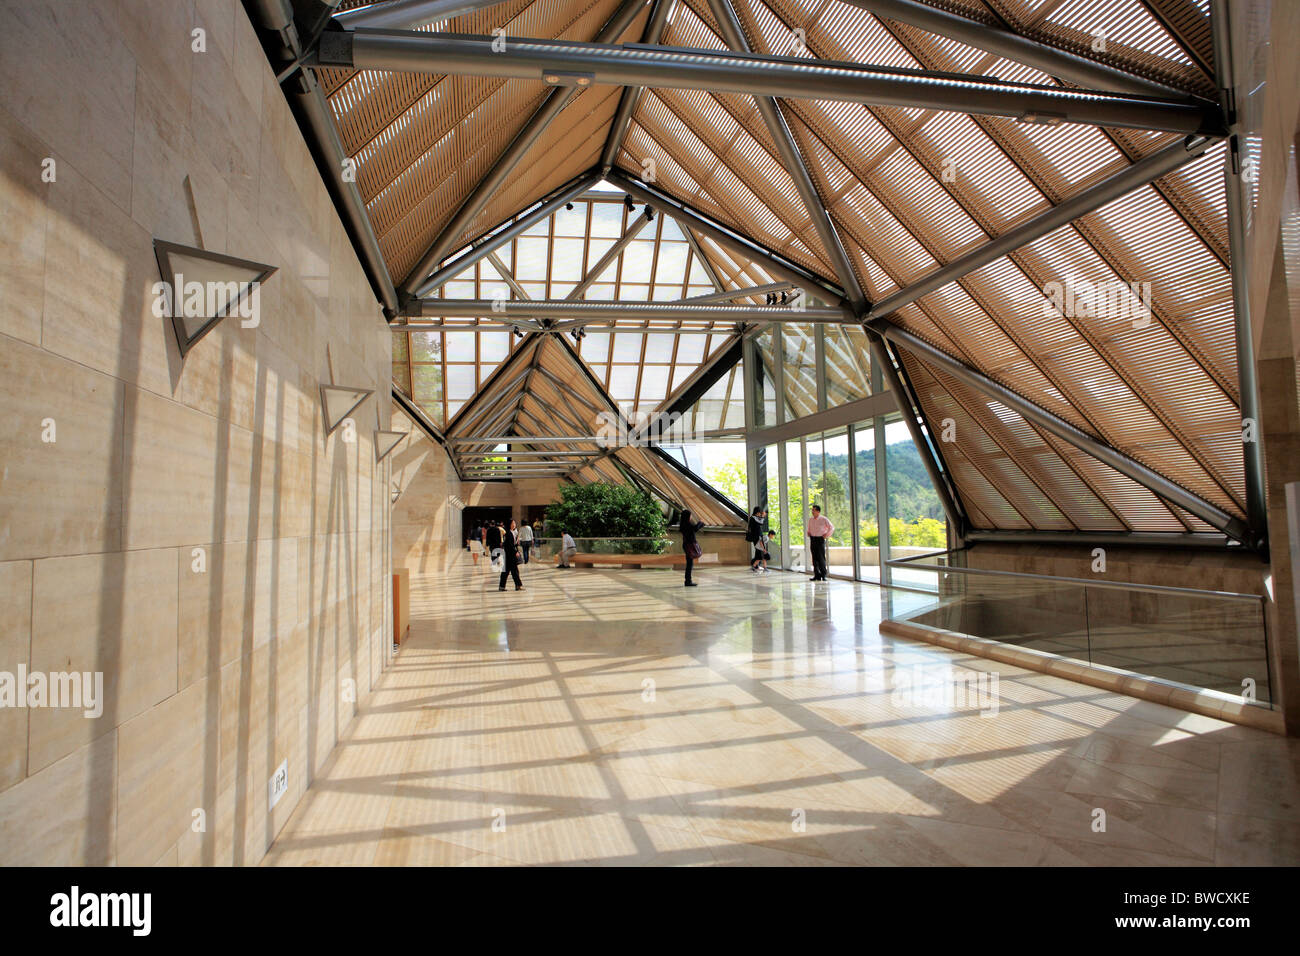 31 Miho Museum Images, Stock Photos, 3D objects, & Vectors